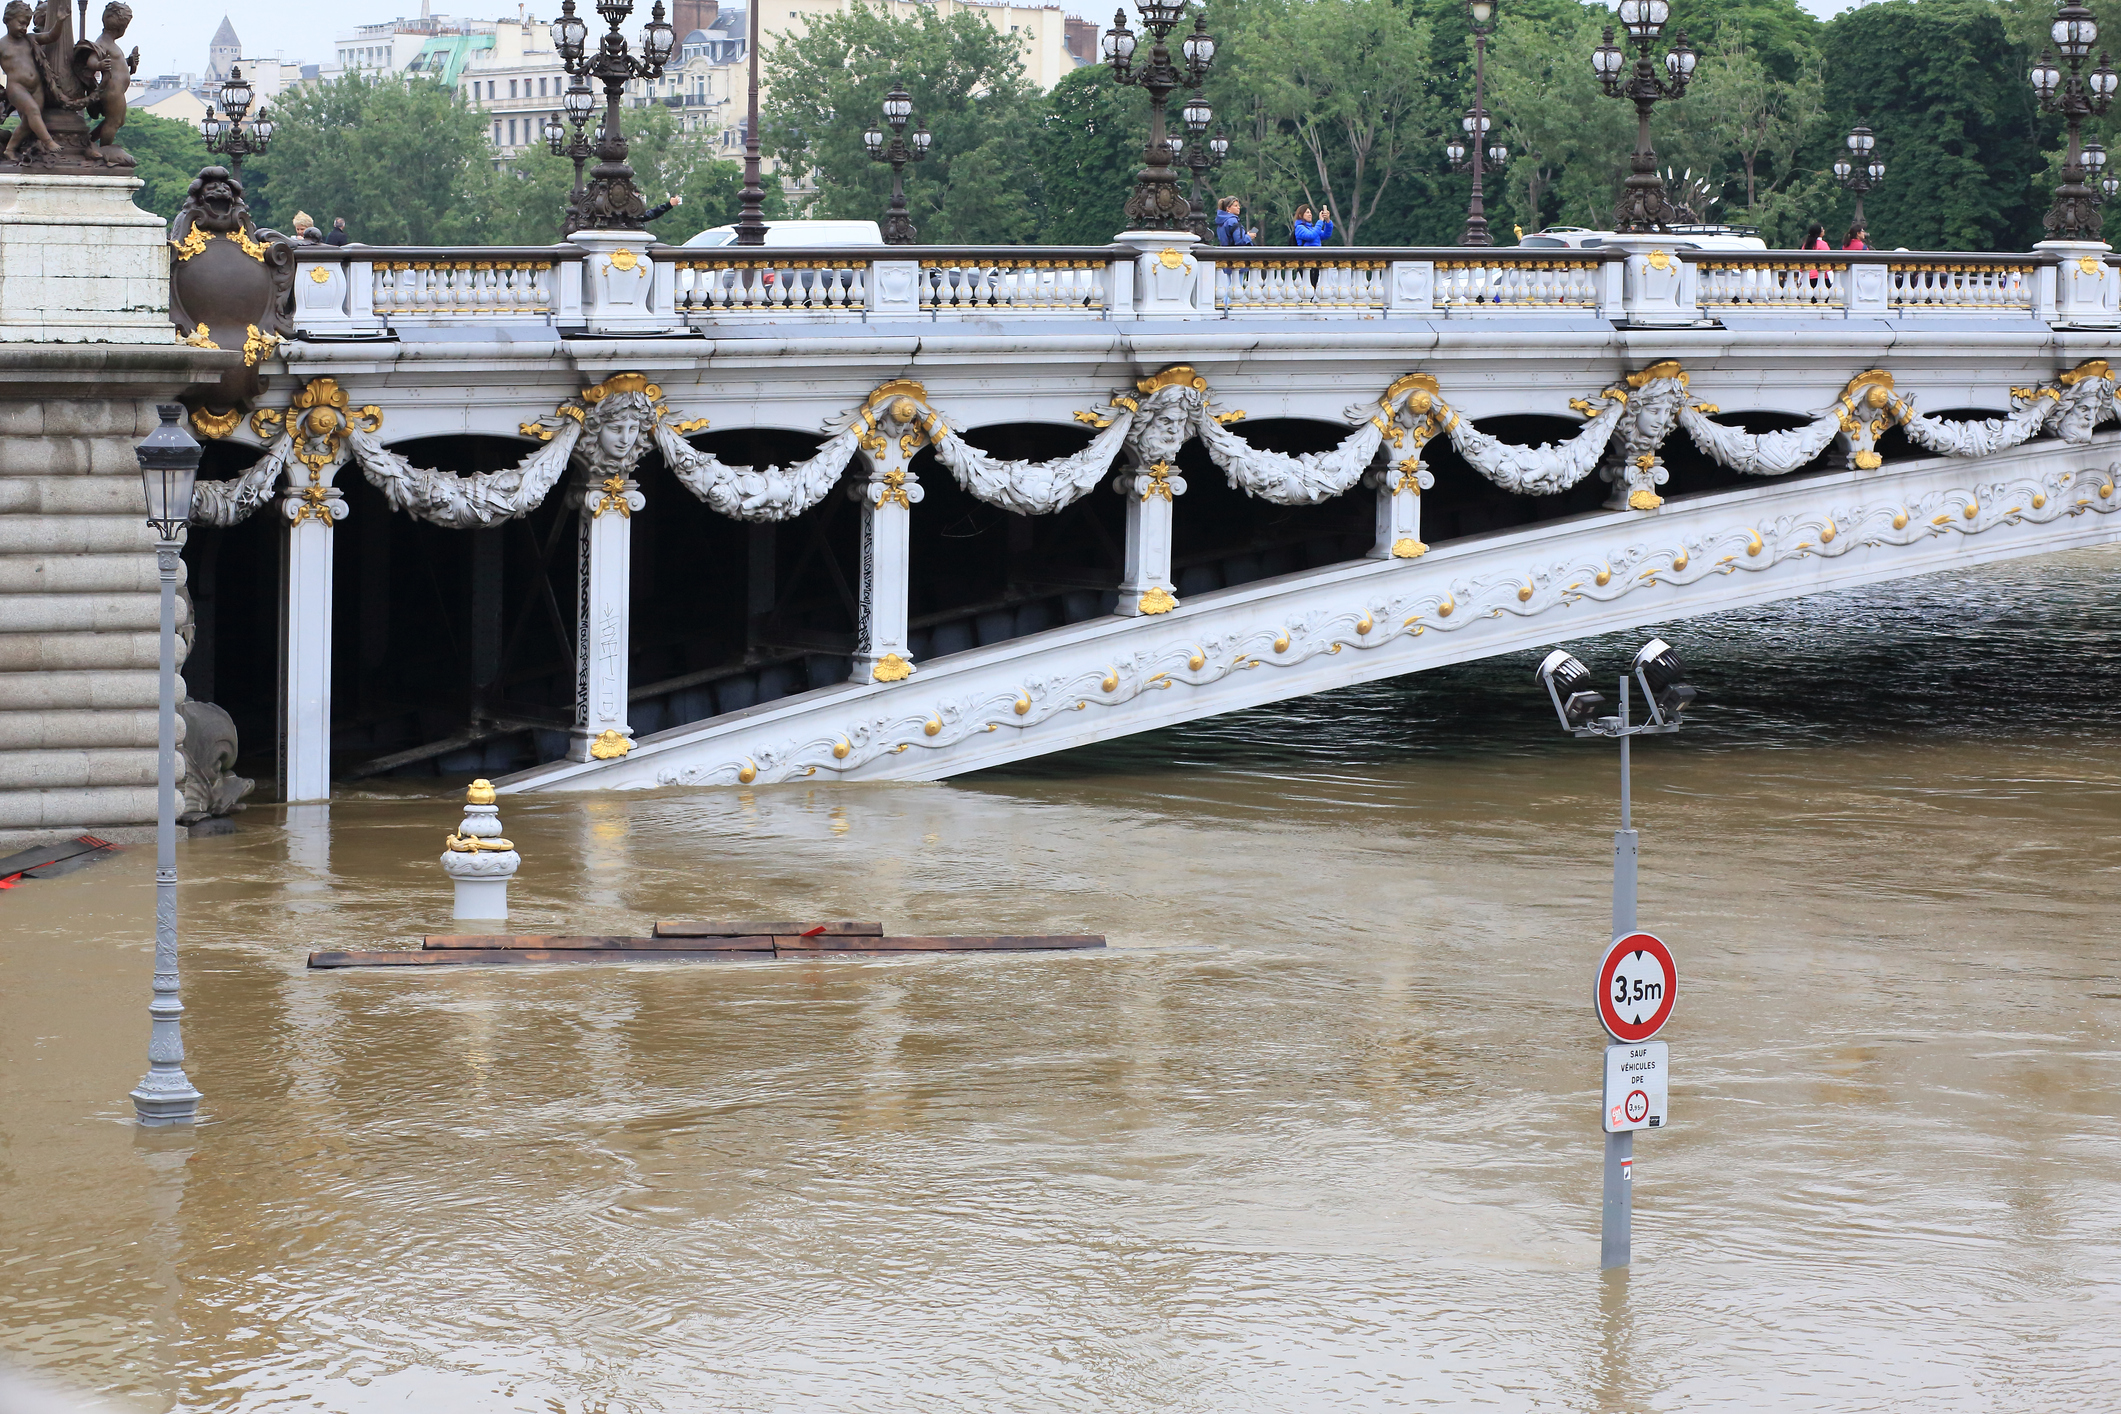 From Notre Dame to the Eiffel Tower the Seine River overflowed. (Virginie Blanquart—Getty Images)